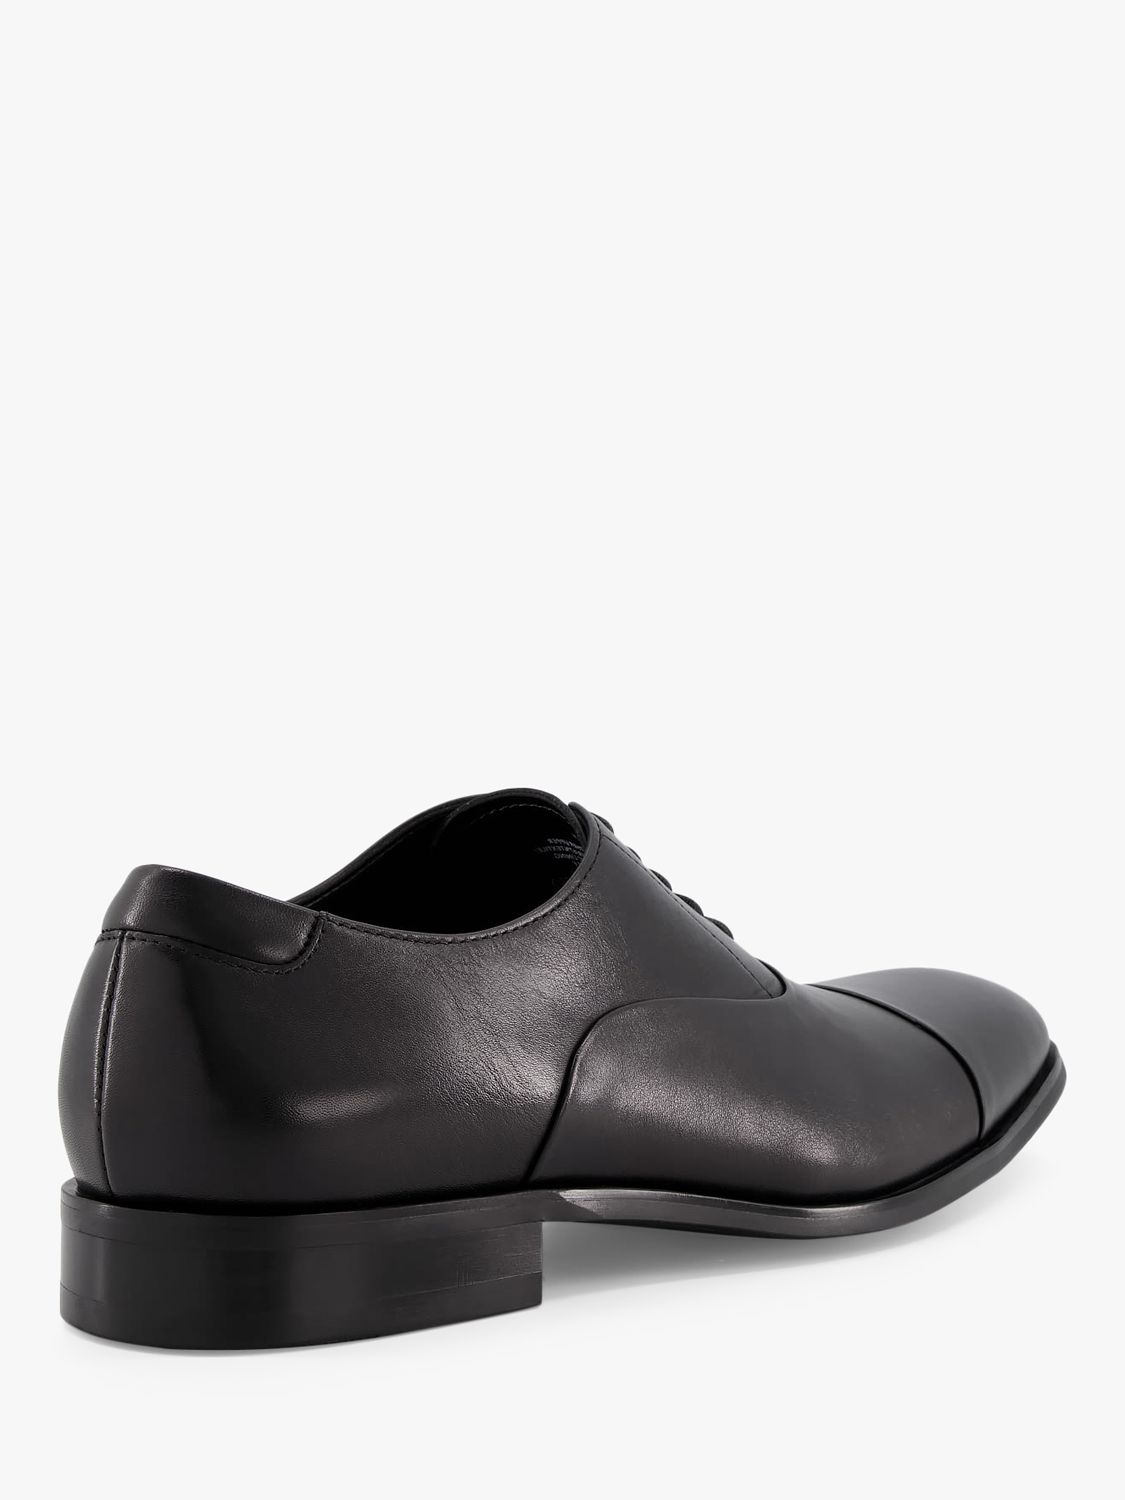 Dune Secrecy Leather Derby Shoes, Black, 7